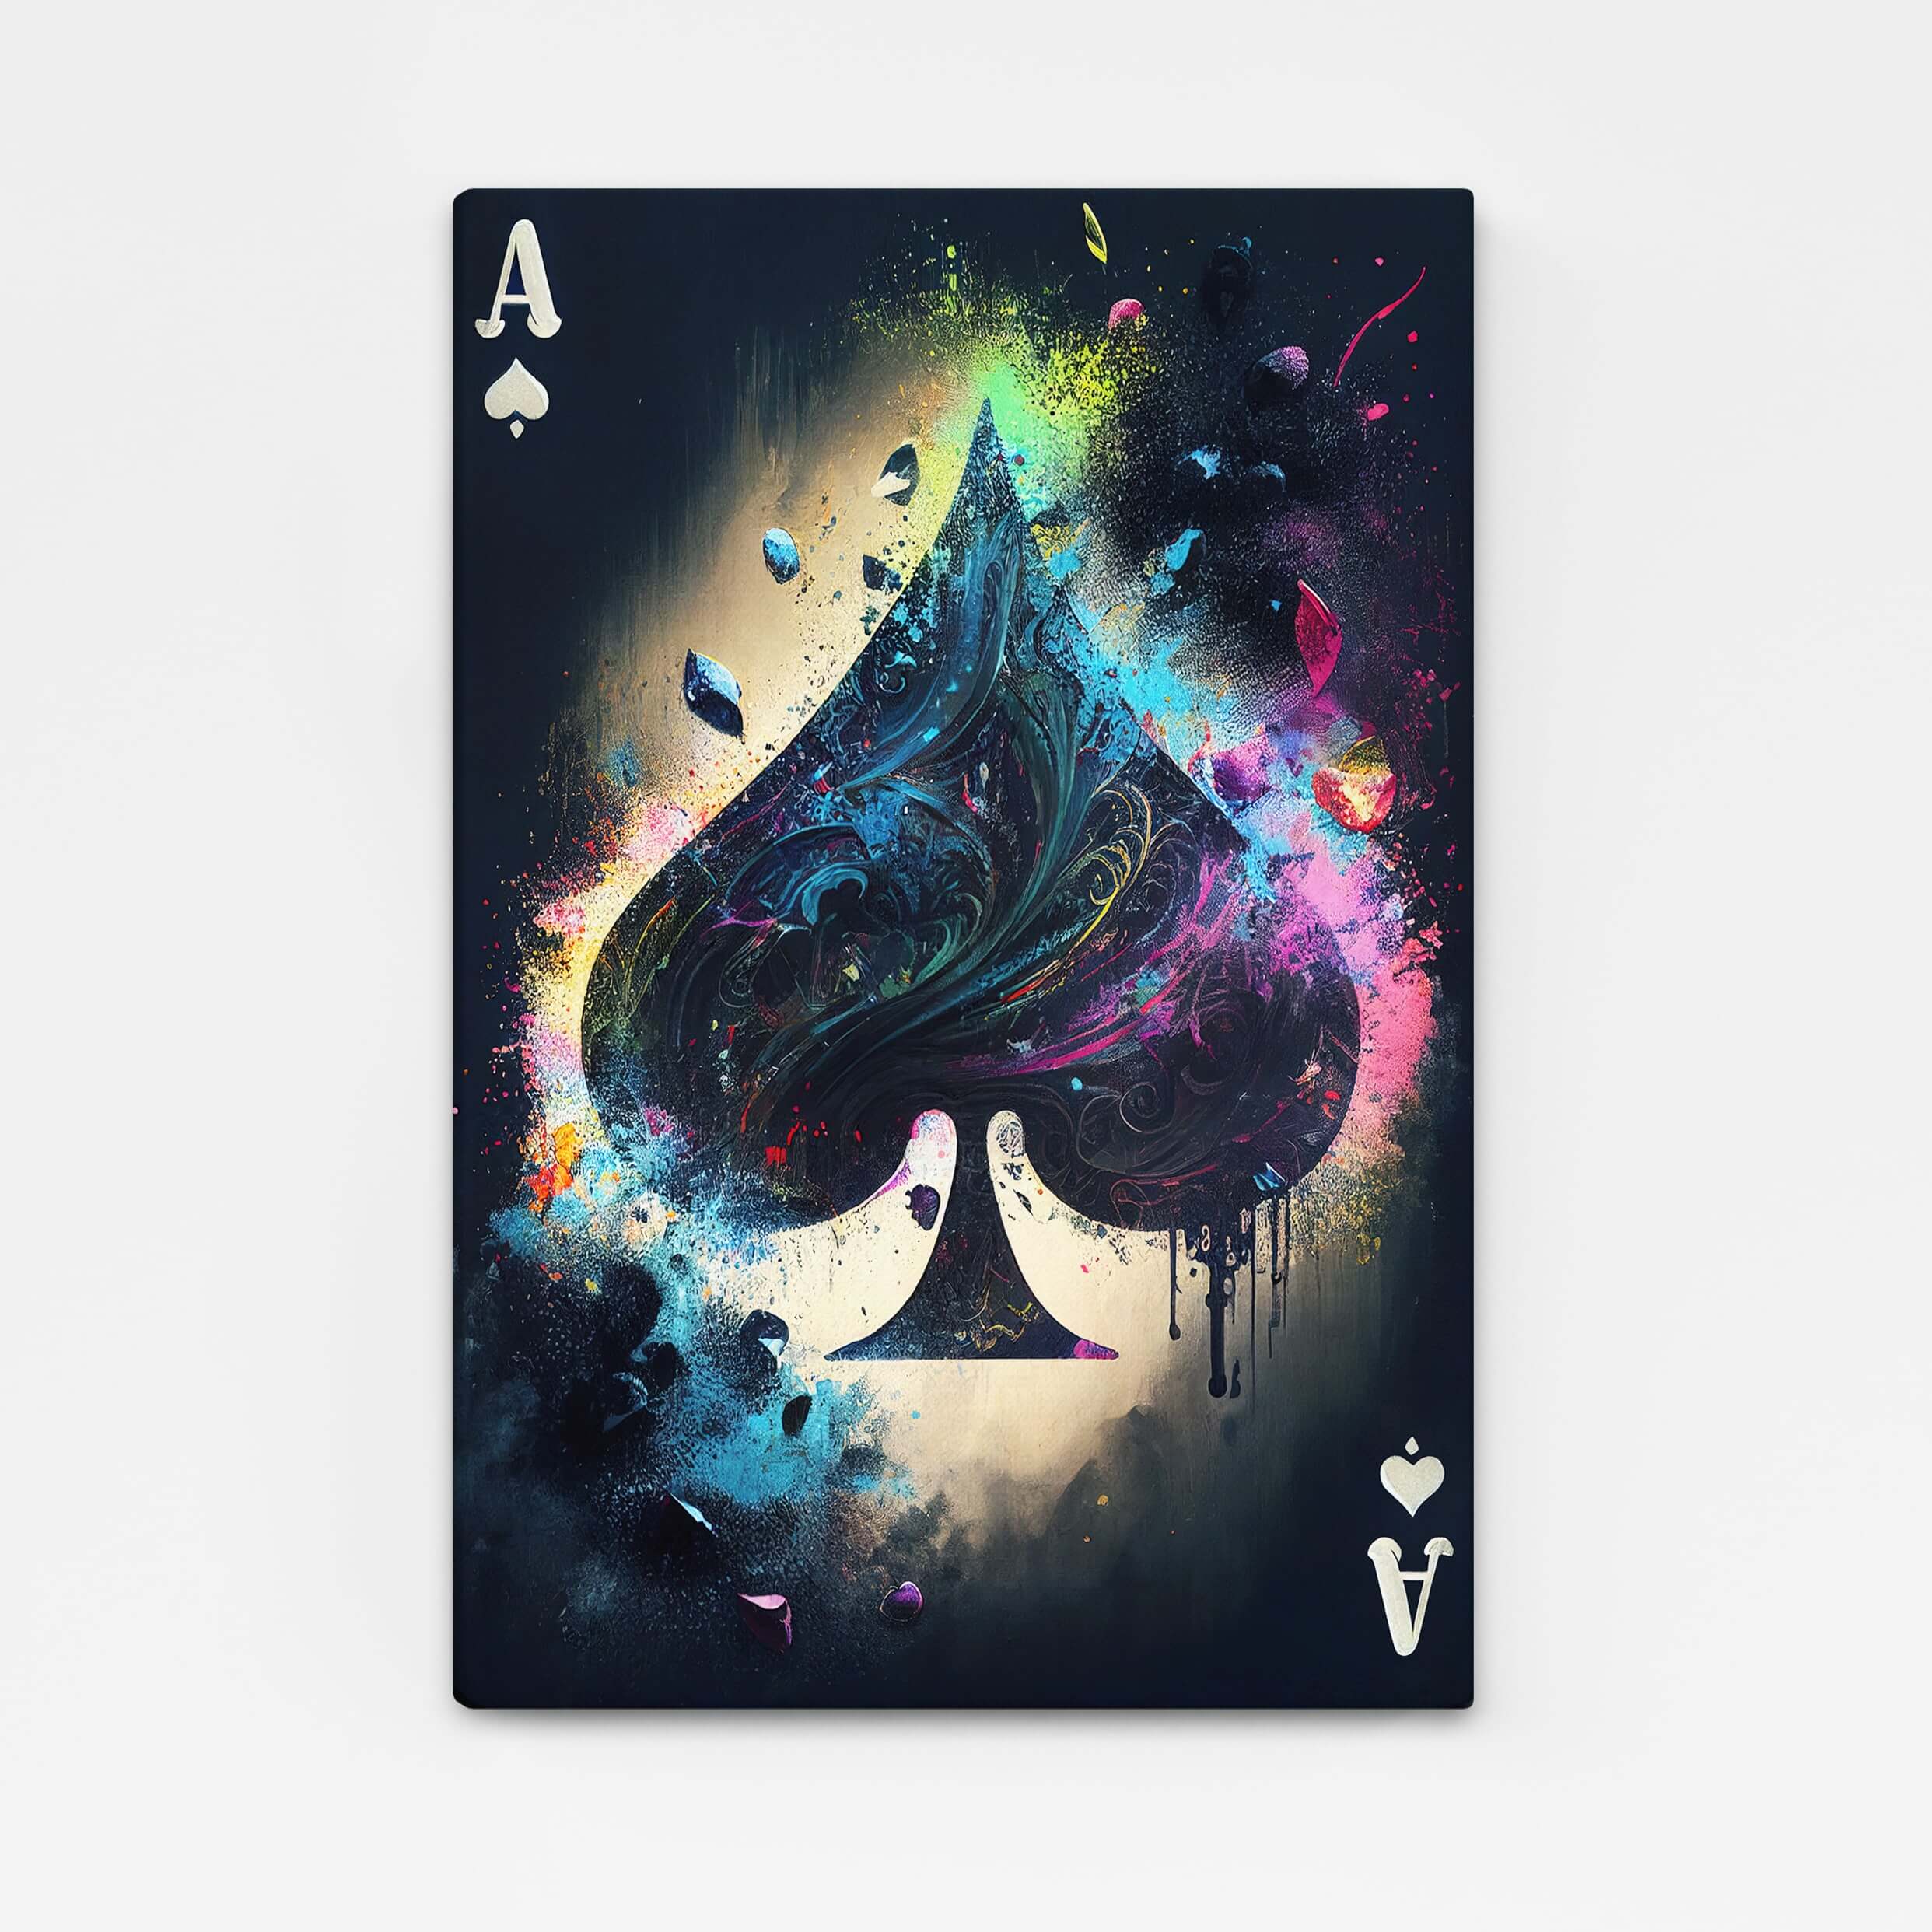 Ace of Spades Wallpapers - 4k, HD Ace of Spades Backgrounds on WallpaperBat